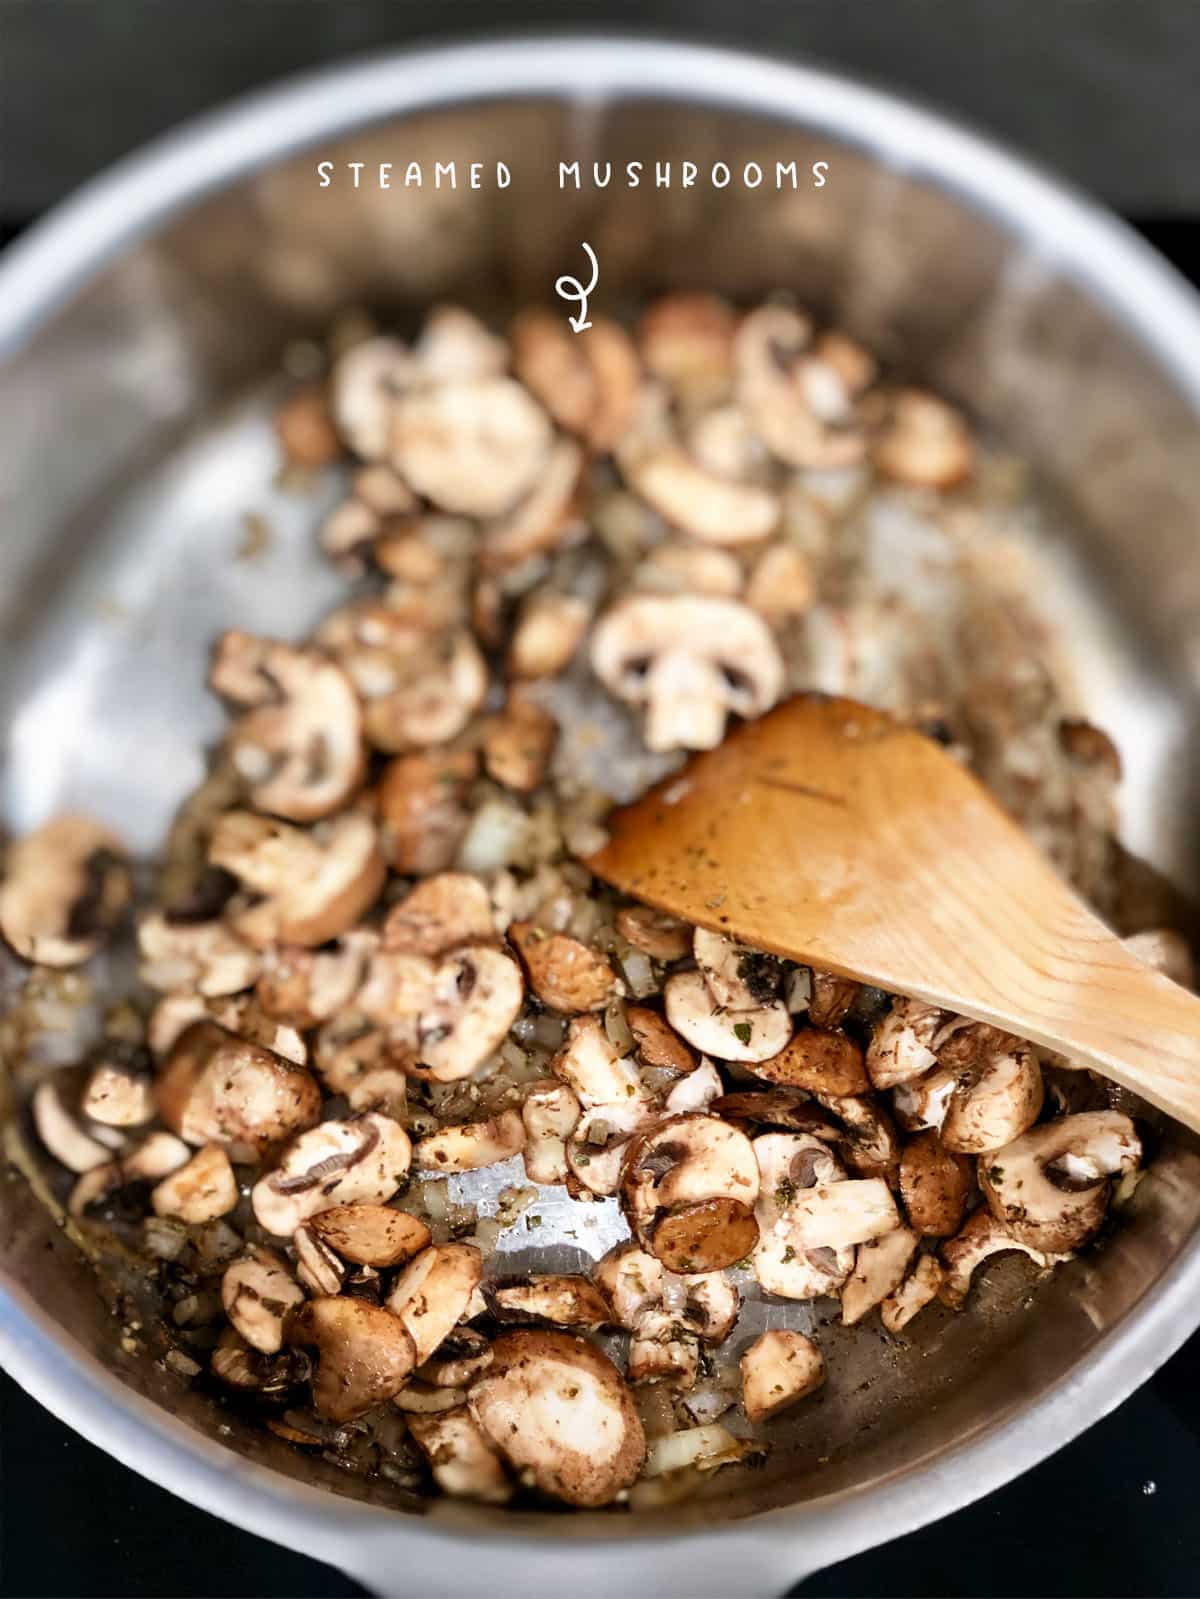 Steamed mushrooms are a healthy and delicious way to enjoy mushrooms. They are quick and easy to make and make a great snack or side dish.